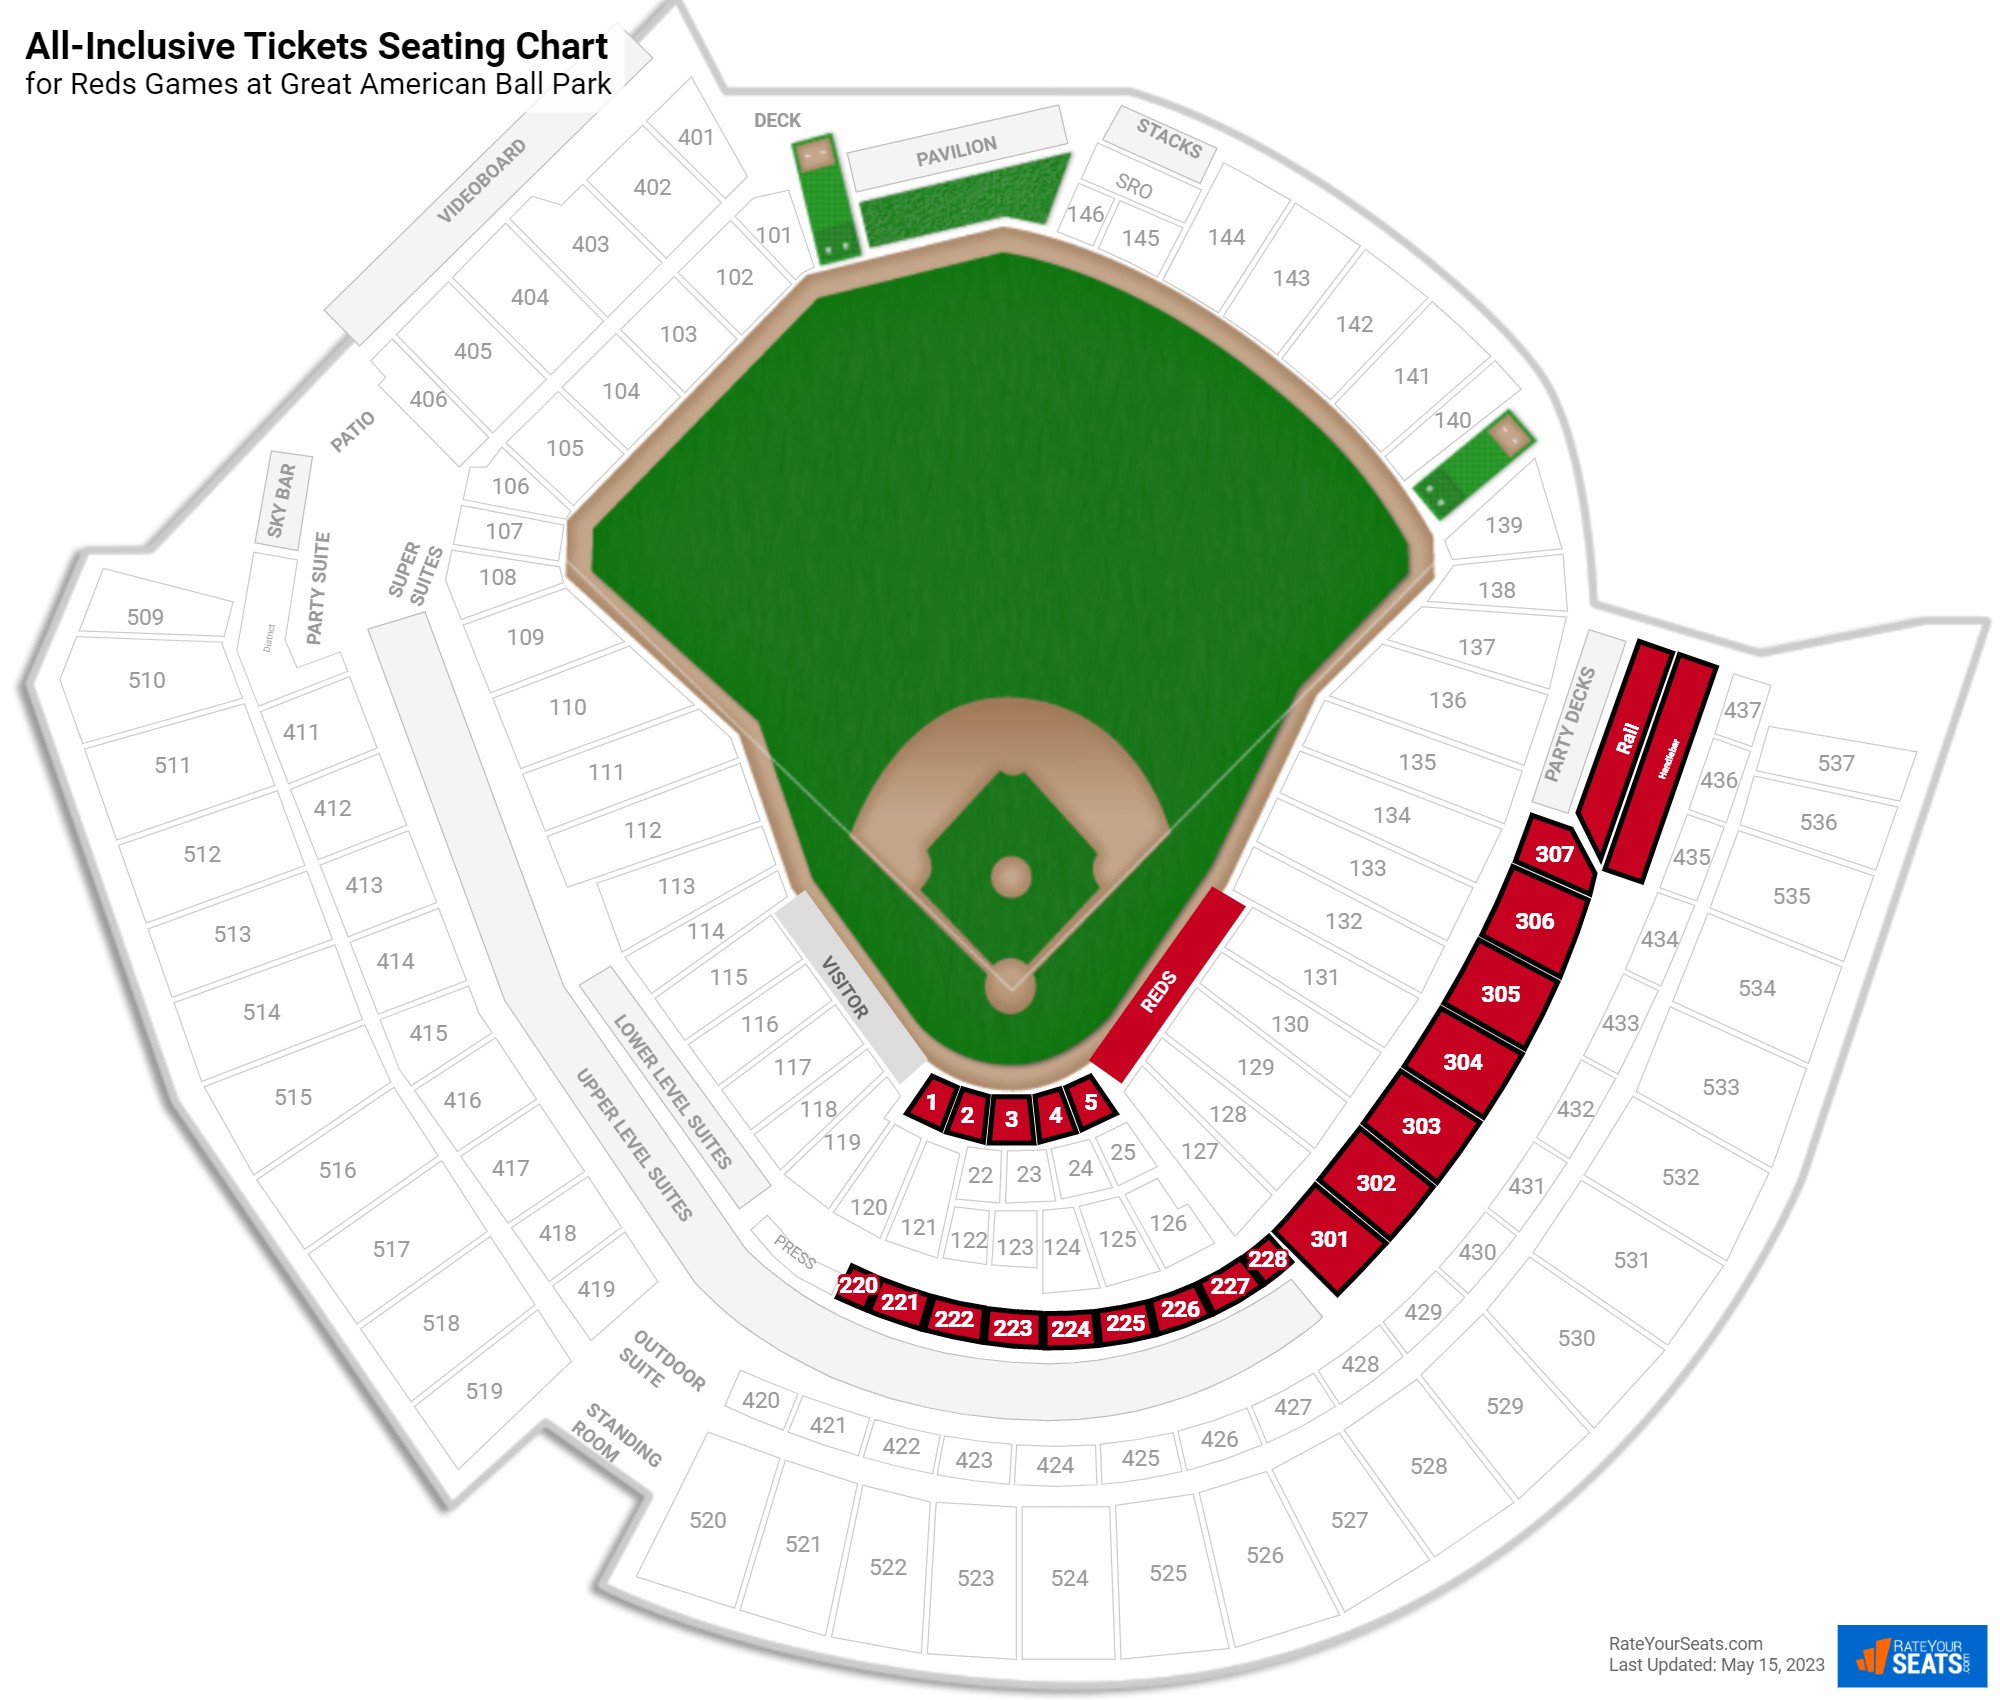 Reds All-Inclusive Tickets Seating Chart at Great American Ball Park